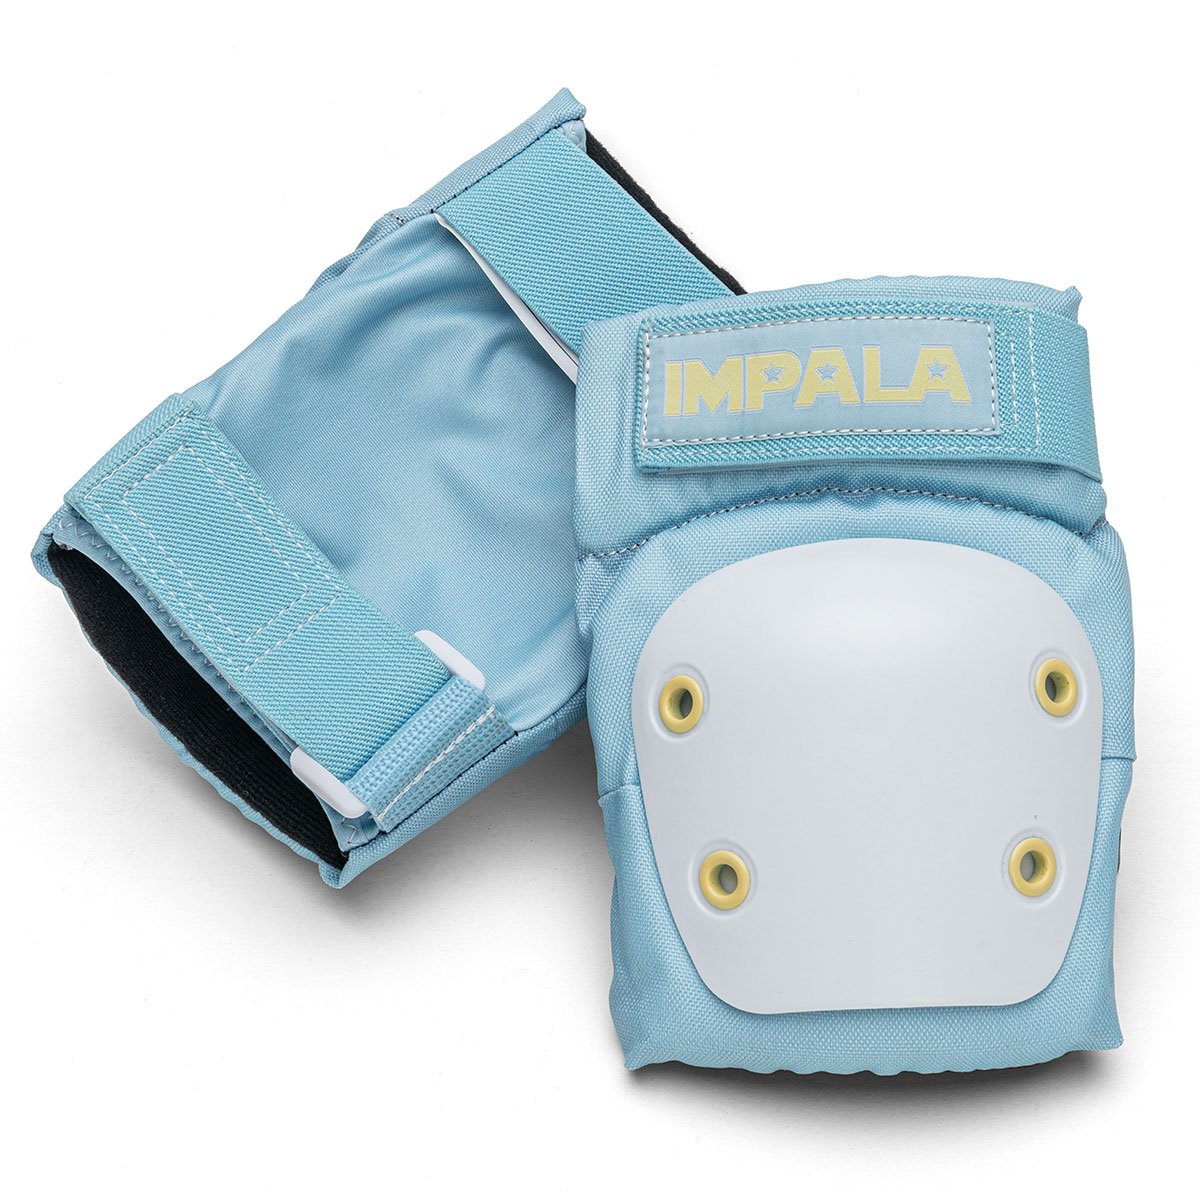 Impala Protective Kids pack skyblue / yellow